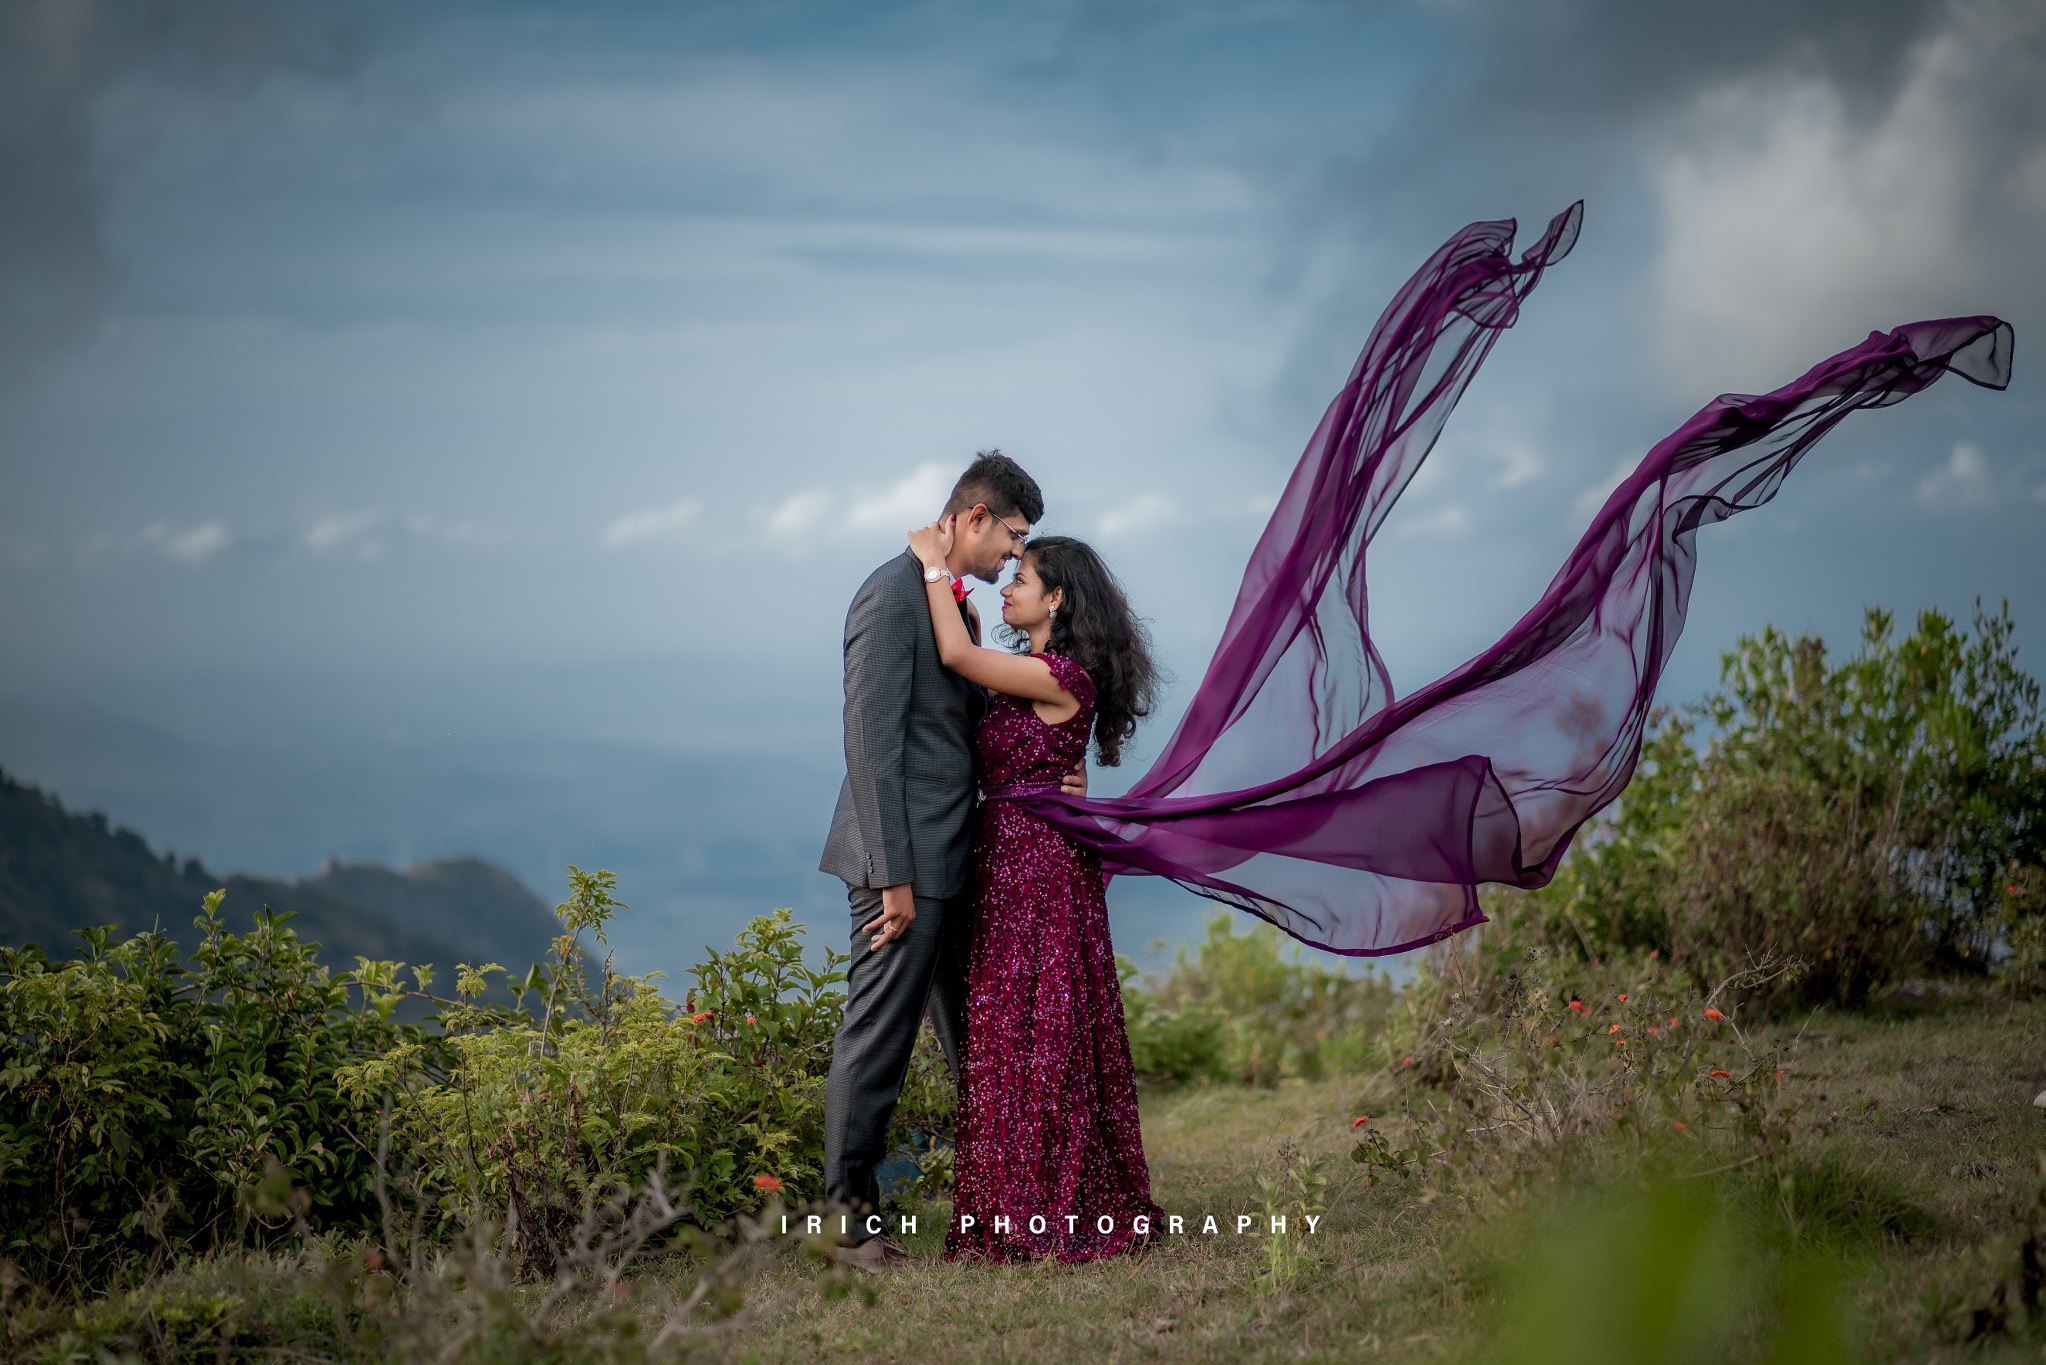 Perfect Pre-Wedding Photoshoot Attire A Guide to Stunning Outfits